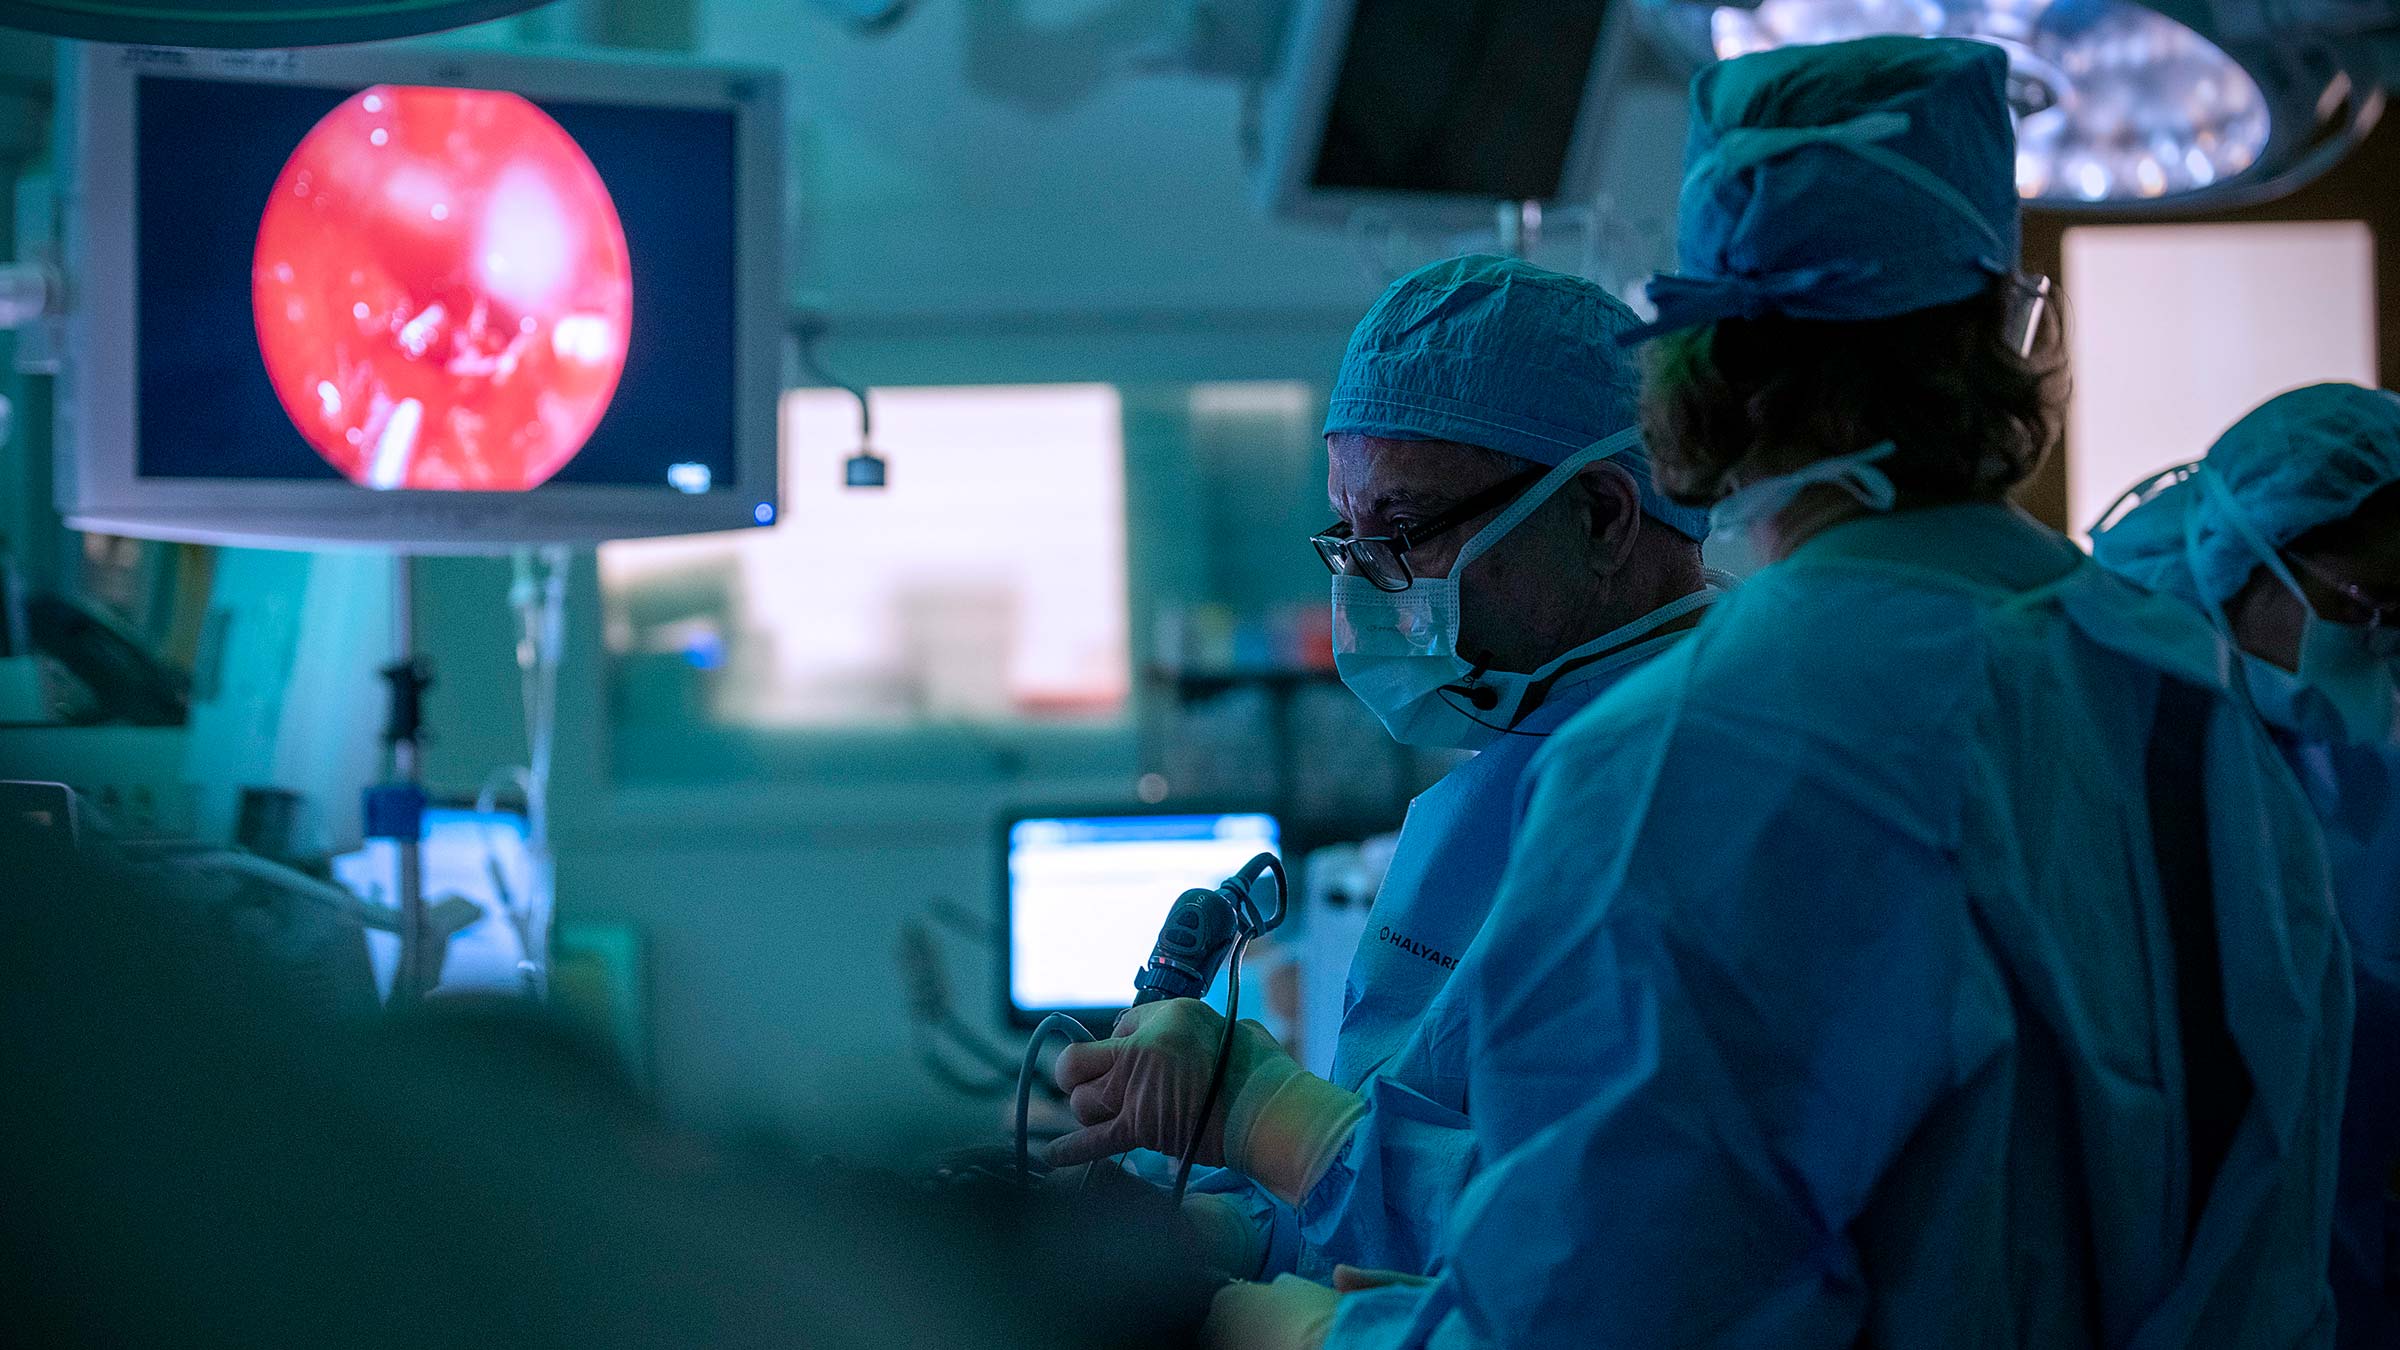 Surgical team makes Ohio State a destination for treating rare, difficult skull base tumors